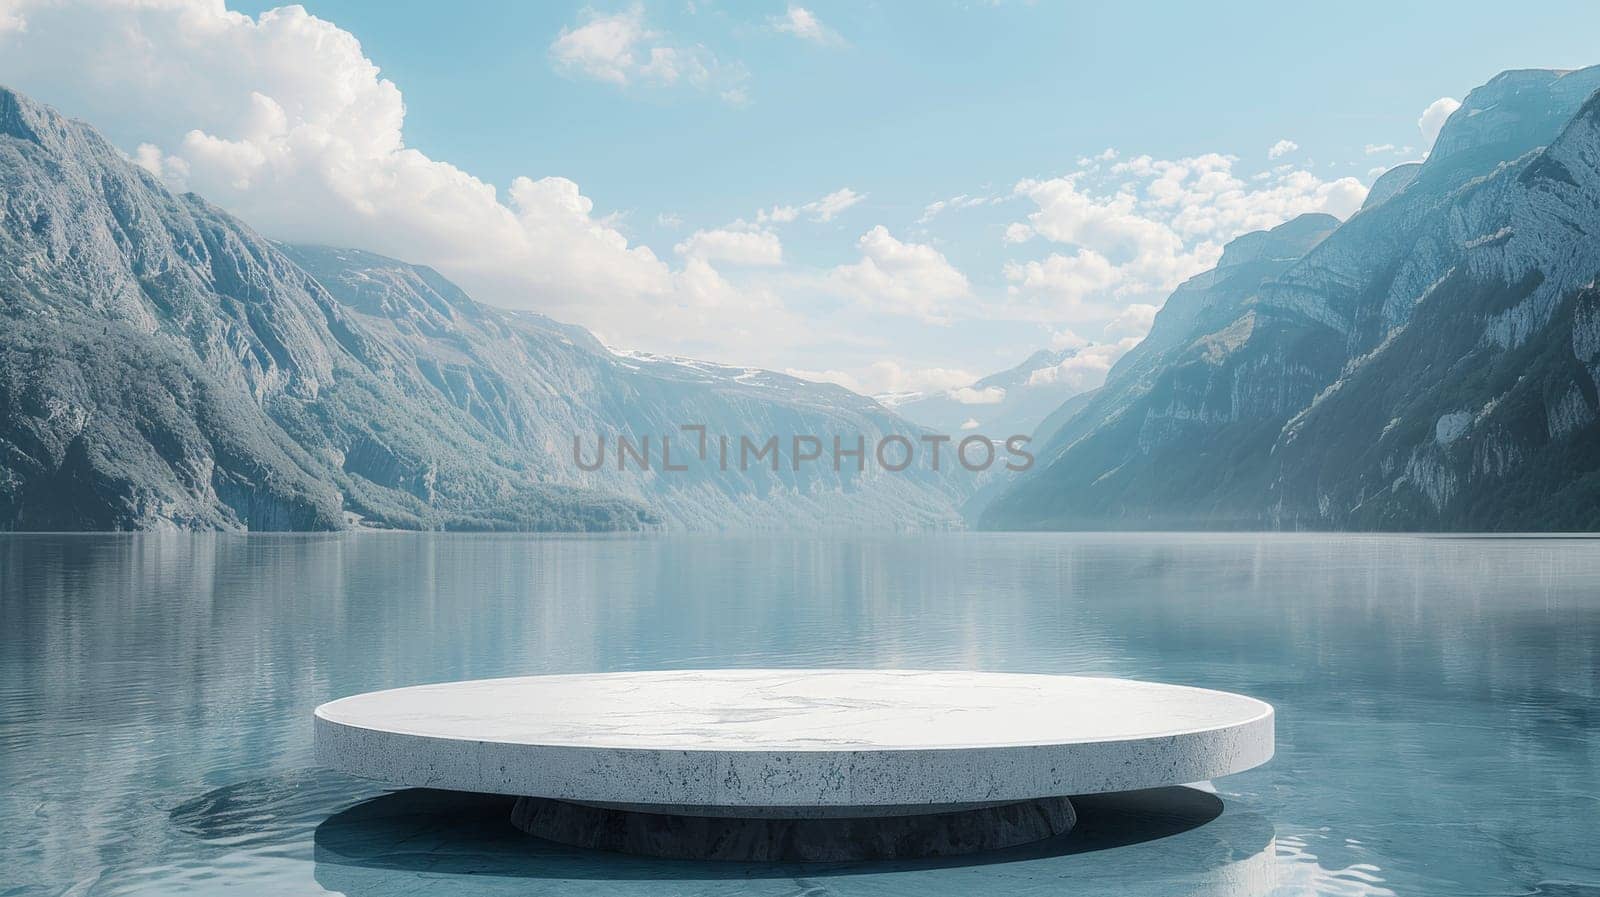 A large round or podium show case white object sits on a body of water by itchaznong